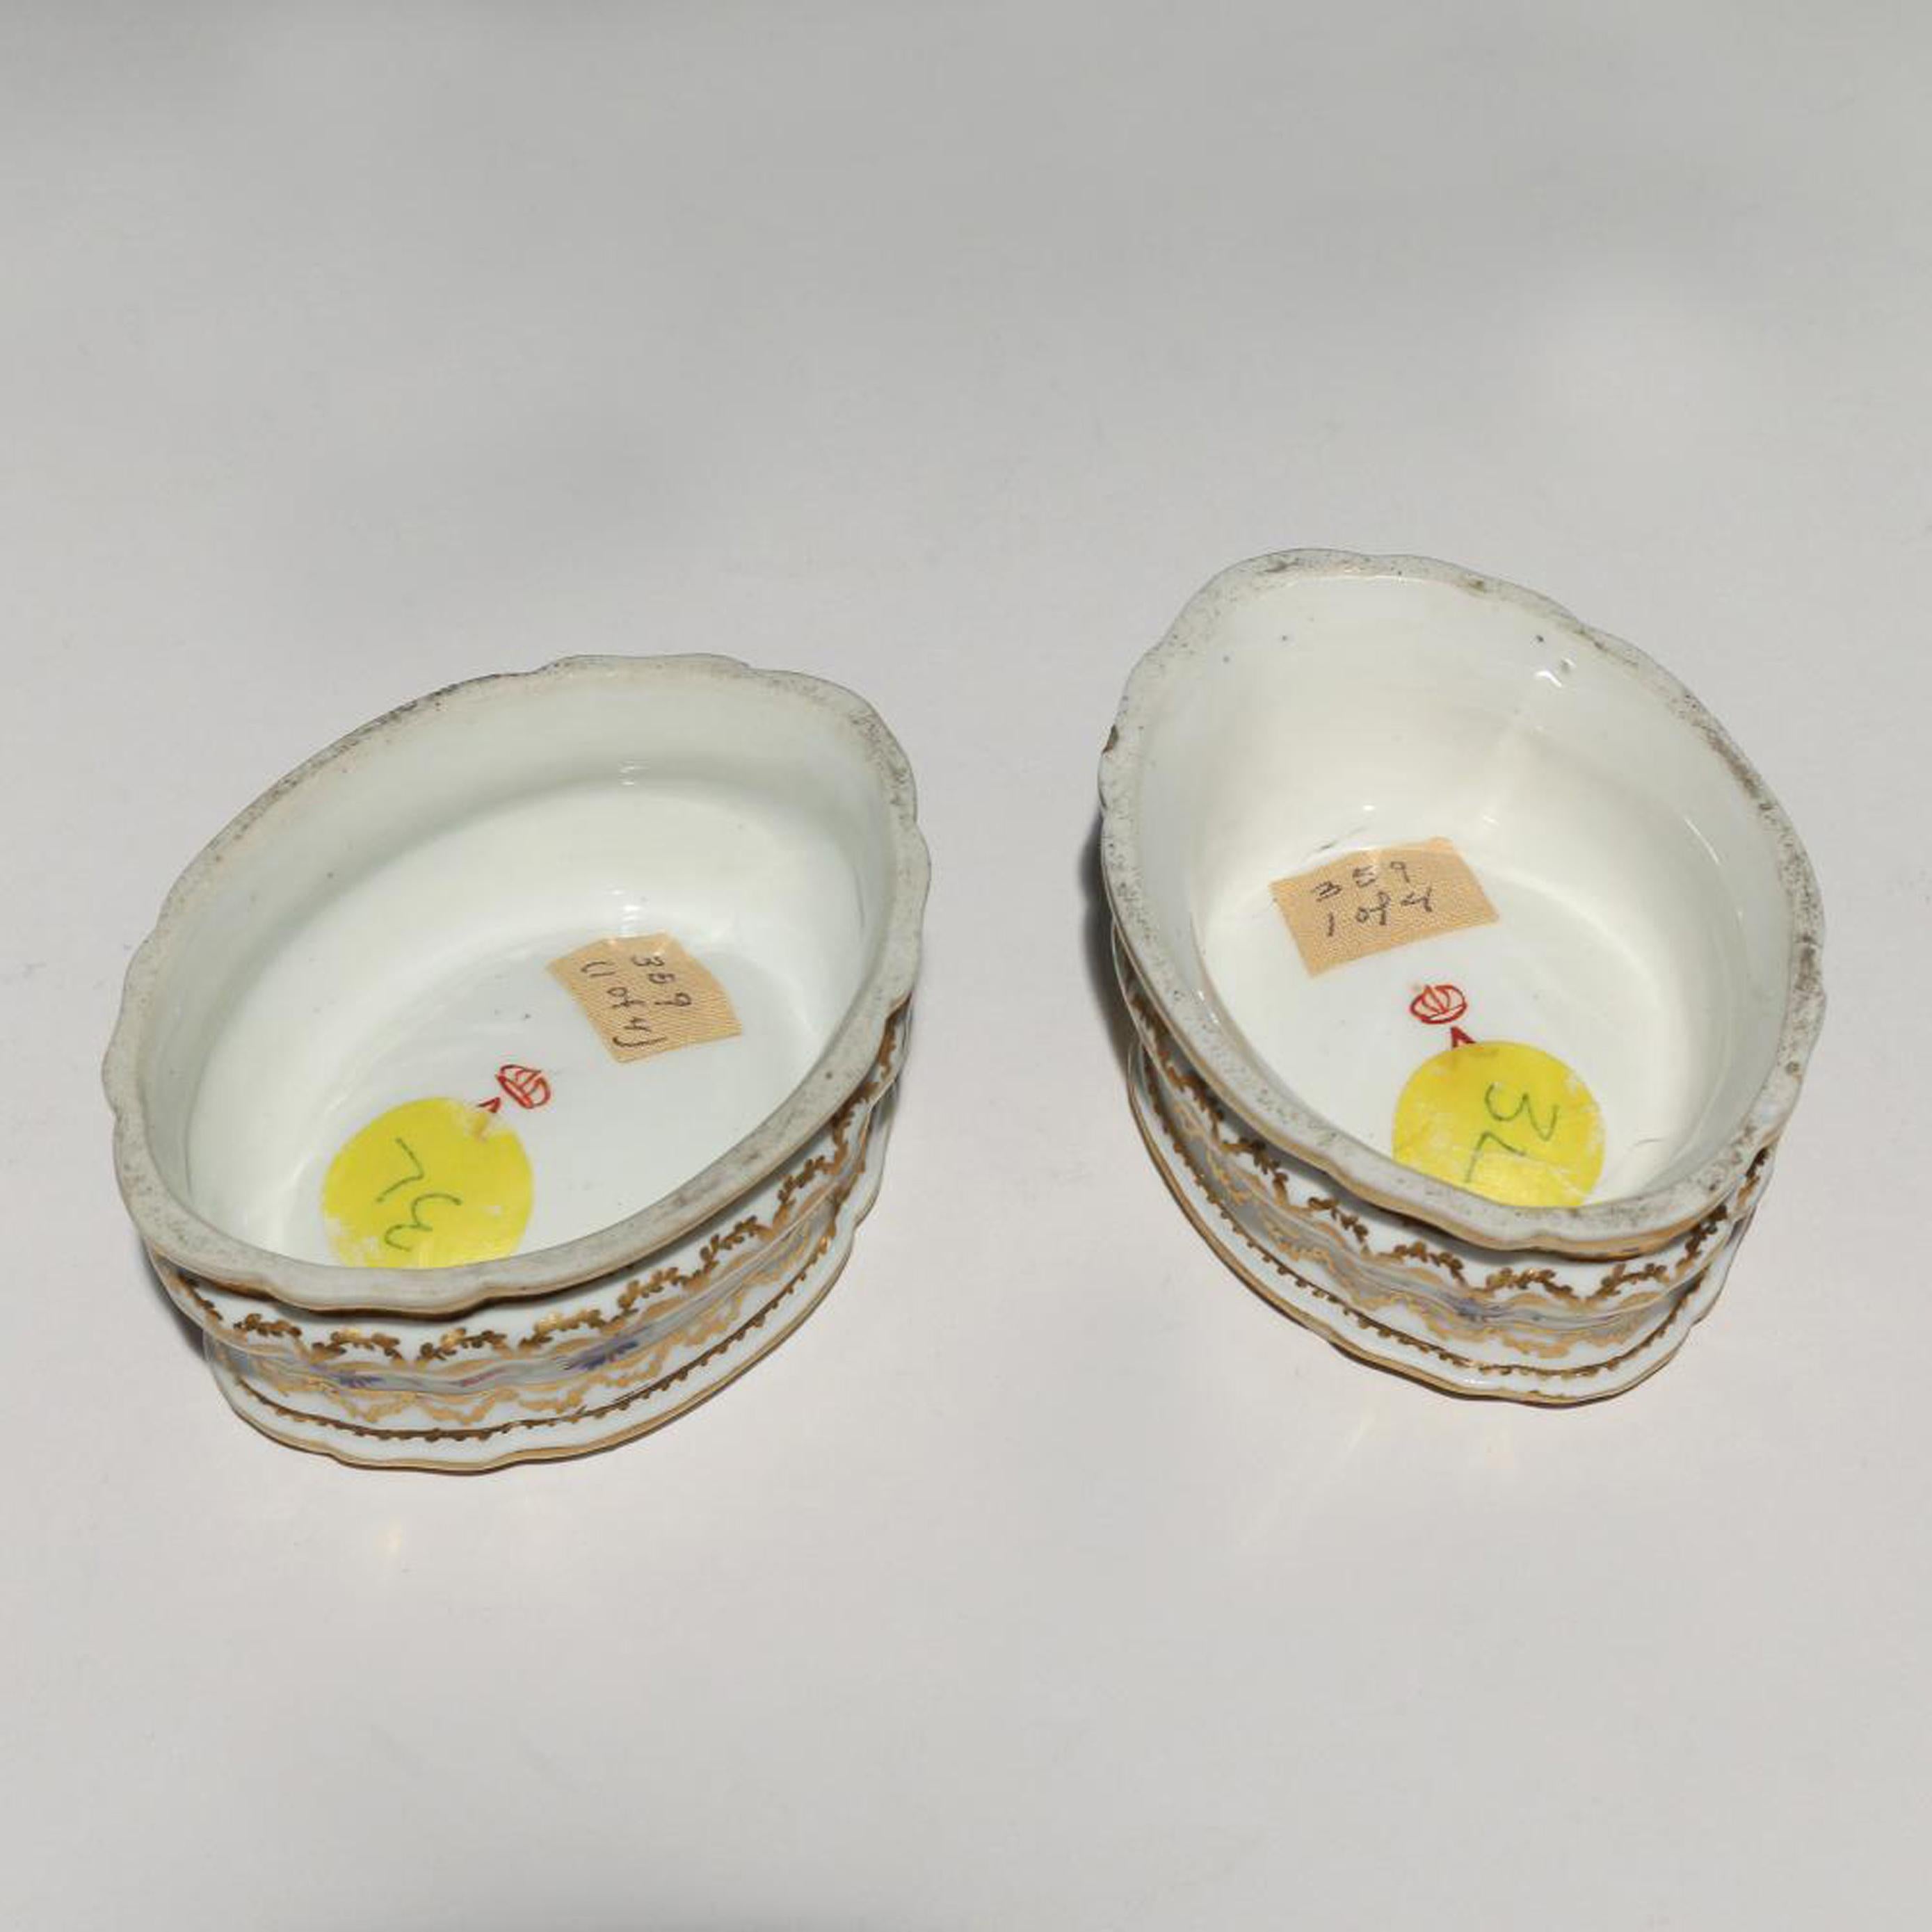 French porcelain Paris oval trencher salts,
André Leboeuf rue Thiroux, Paris,
Porcelaine a la Reine,
circa 1780
(Ref: ny9090-iir)

The trencher salts have an oval stepped molded body painted with a band of cornflowers, fuschia-colored flower